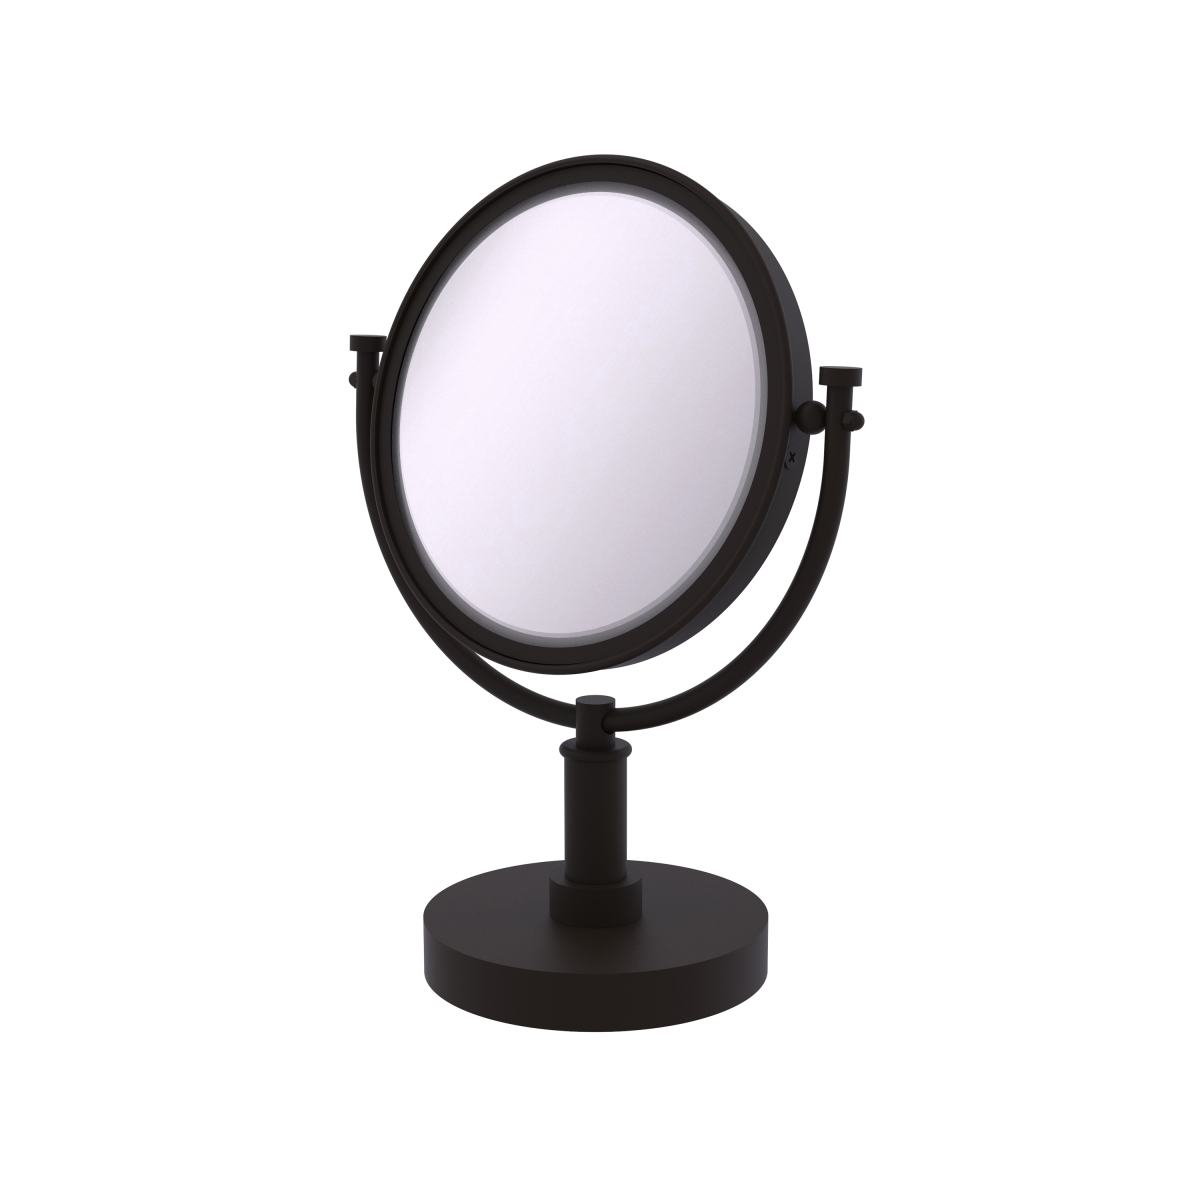 Dm-4-2x-orb Smooth Ring Style 8 In. Vanity Top Make-up Mirror 2x Magnification, Oil Rubbed Bronze